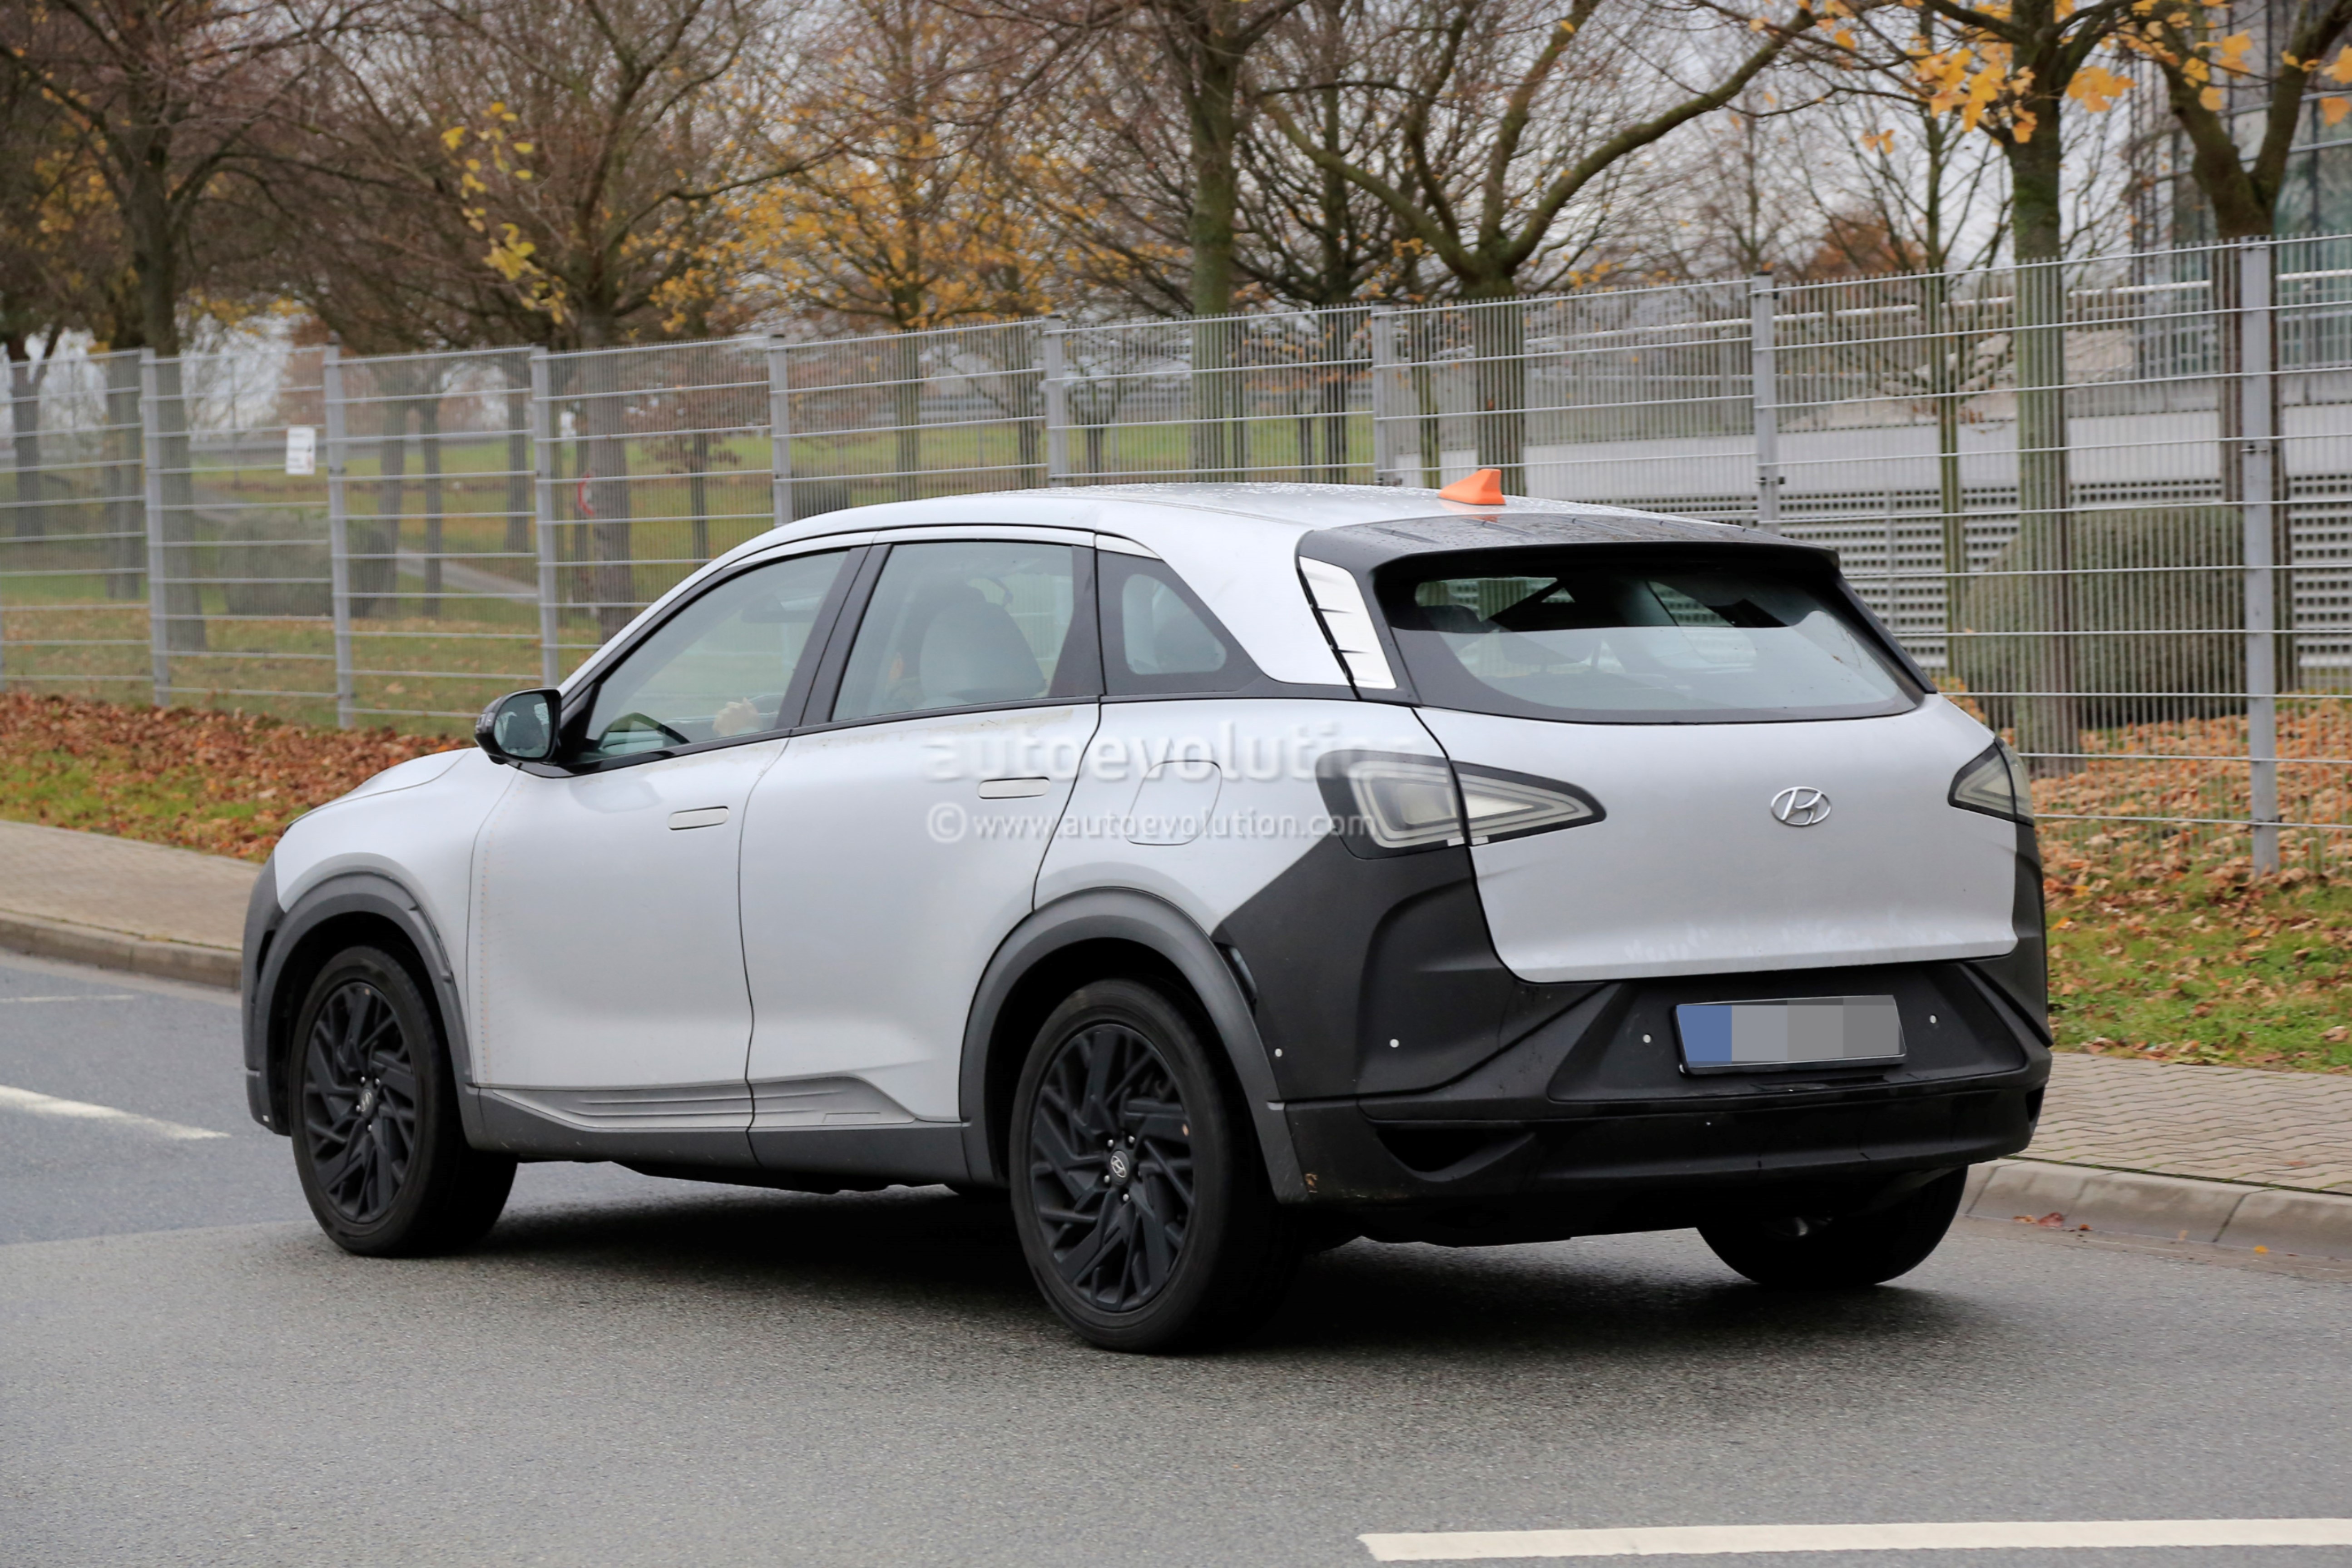 Spyshots: New Hyundai Fuel Cell Electric SUV Looks Production-Ready